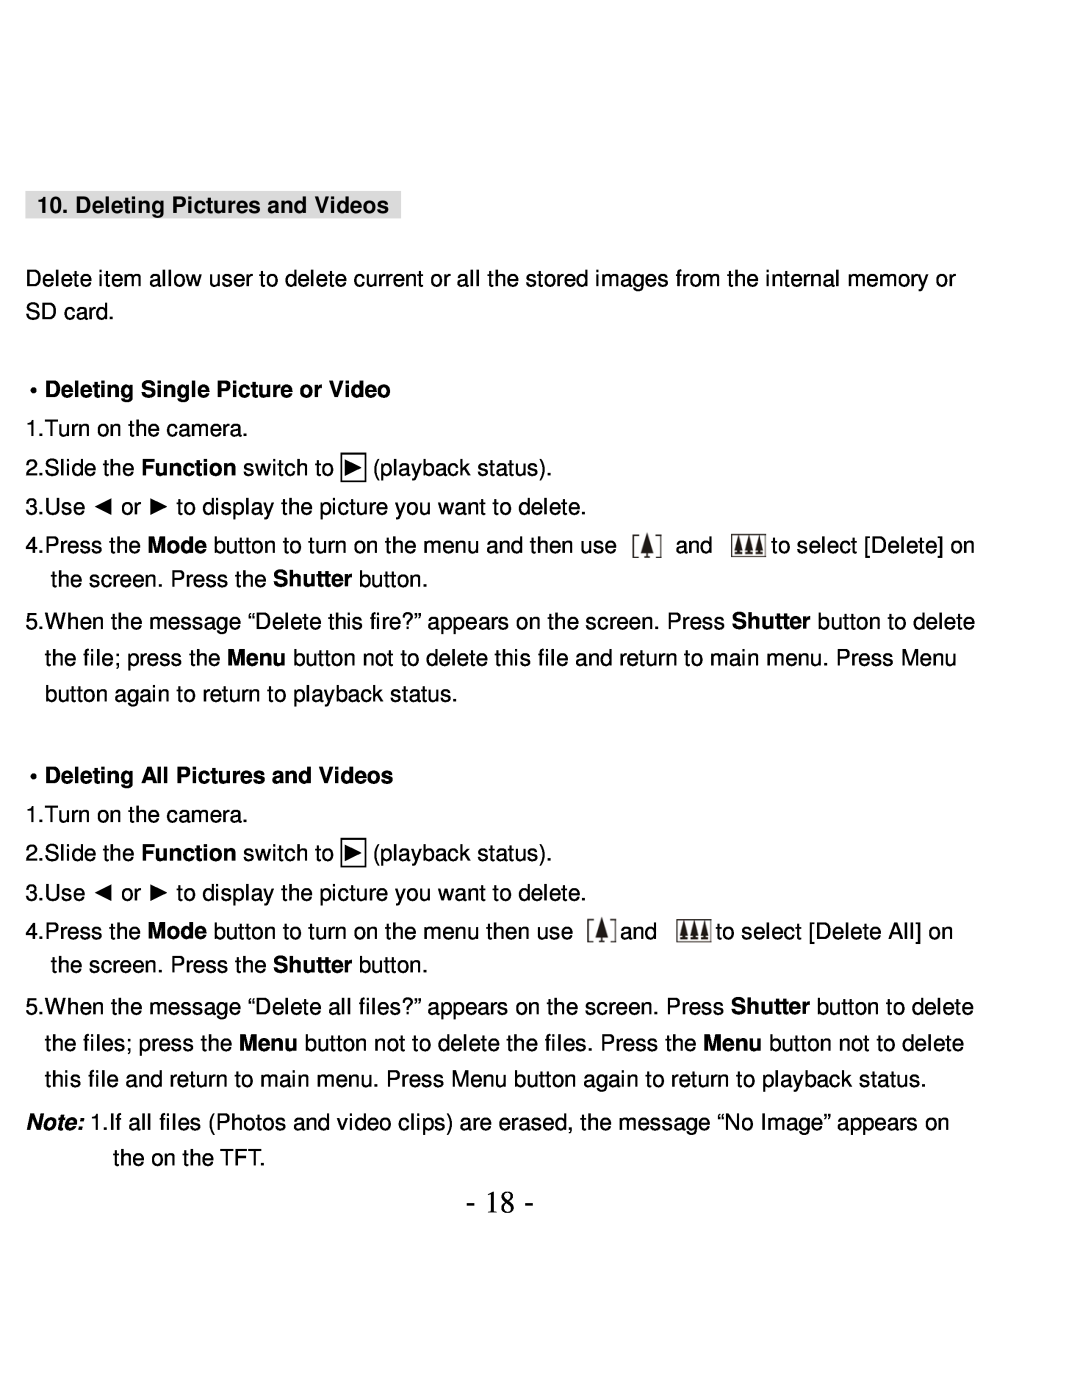 VistaQuest VQ5015 user manual Deleting Pictures and Videos, Deleting Single Picture or Video 1.Turn on the camera 